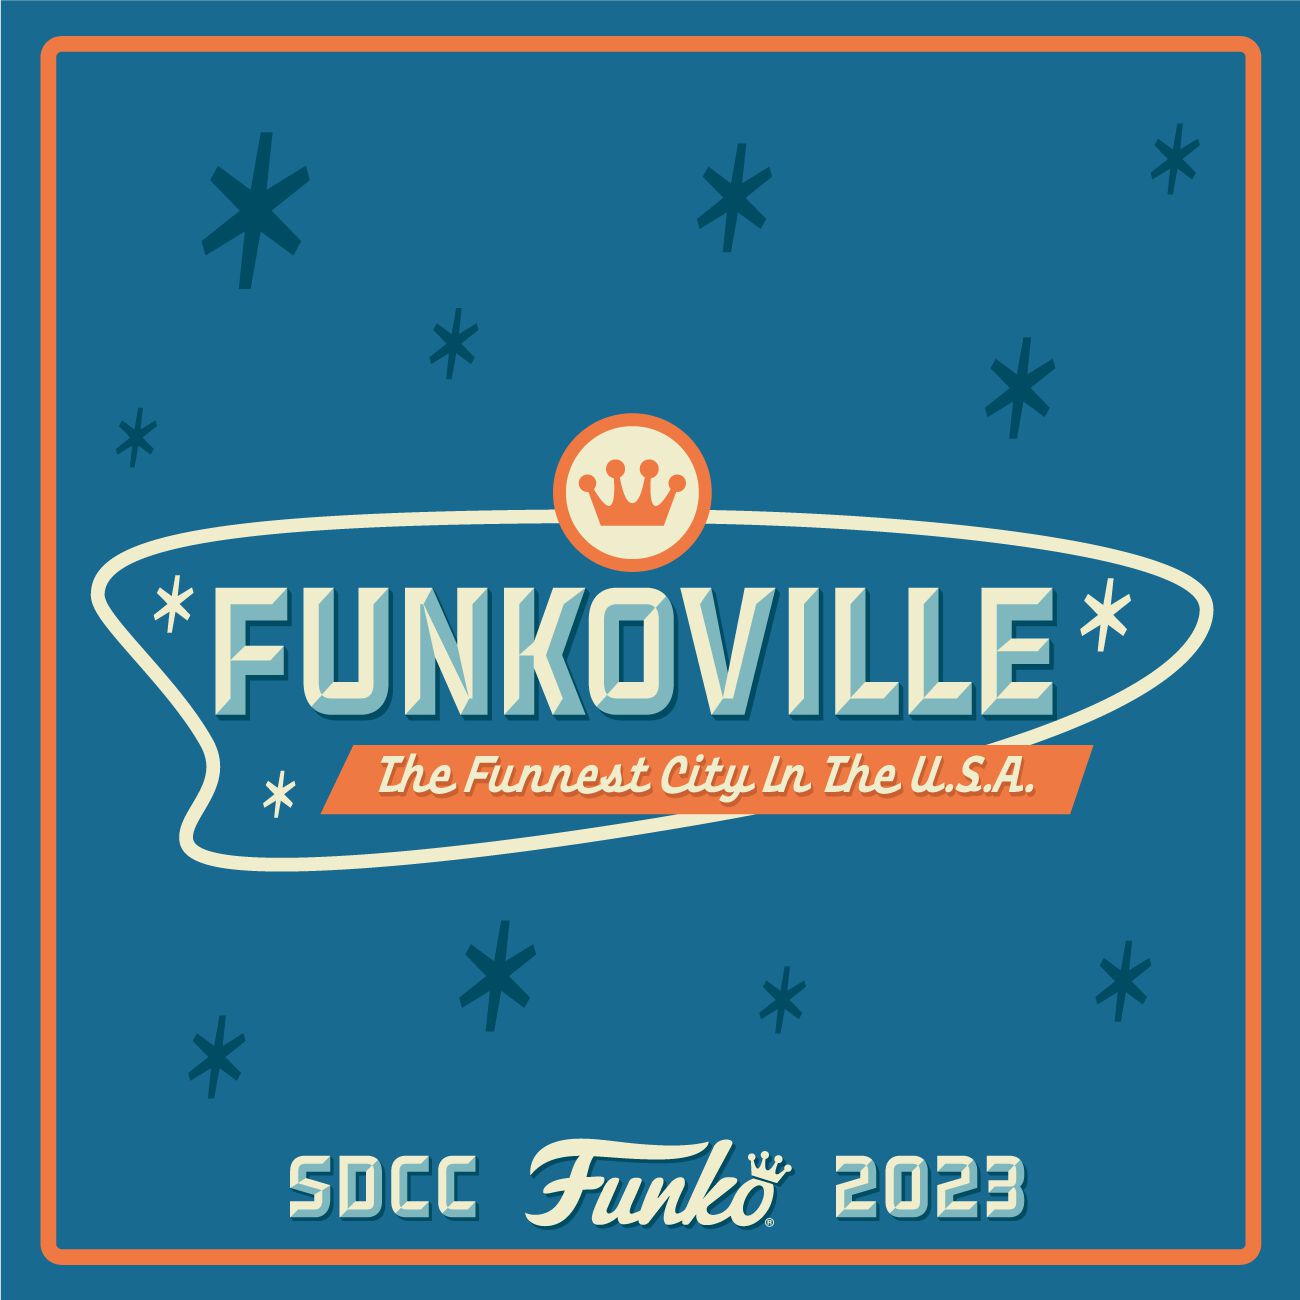 Funkoville at SDCC 2023: Plan Your Visit